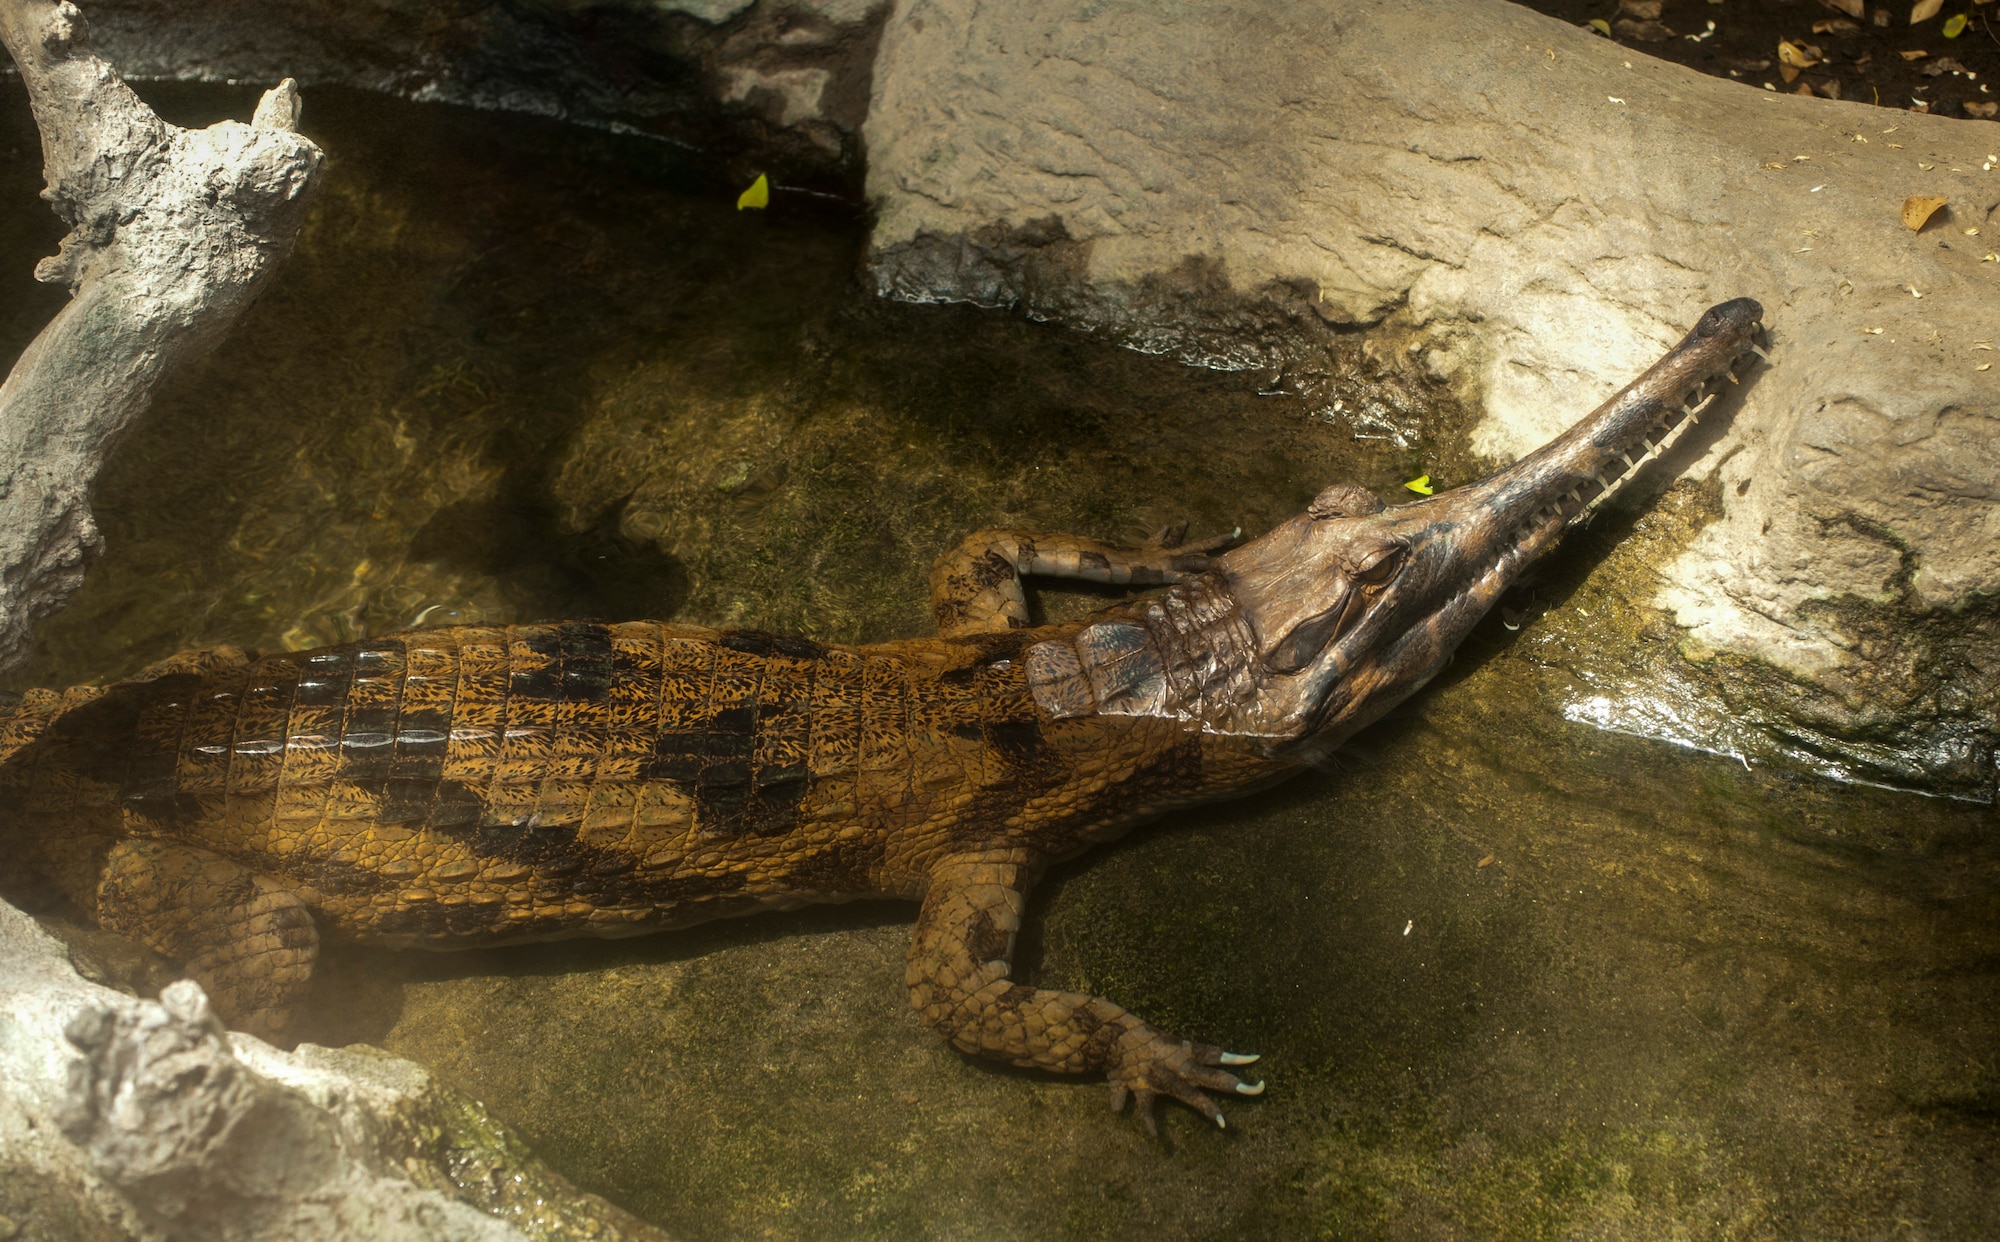 A Malayan Gharial (Tomistoma schlegelii) lays in its enclosure at Ueno Zoo Aug. 6, 2013. The gharial is a carnivore that mainly feeds on fish. Their slender snout allows them to move quickly underwater. (U.S. Air Force photo by Senior Airman Michael Washburn)